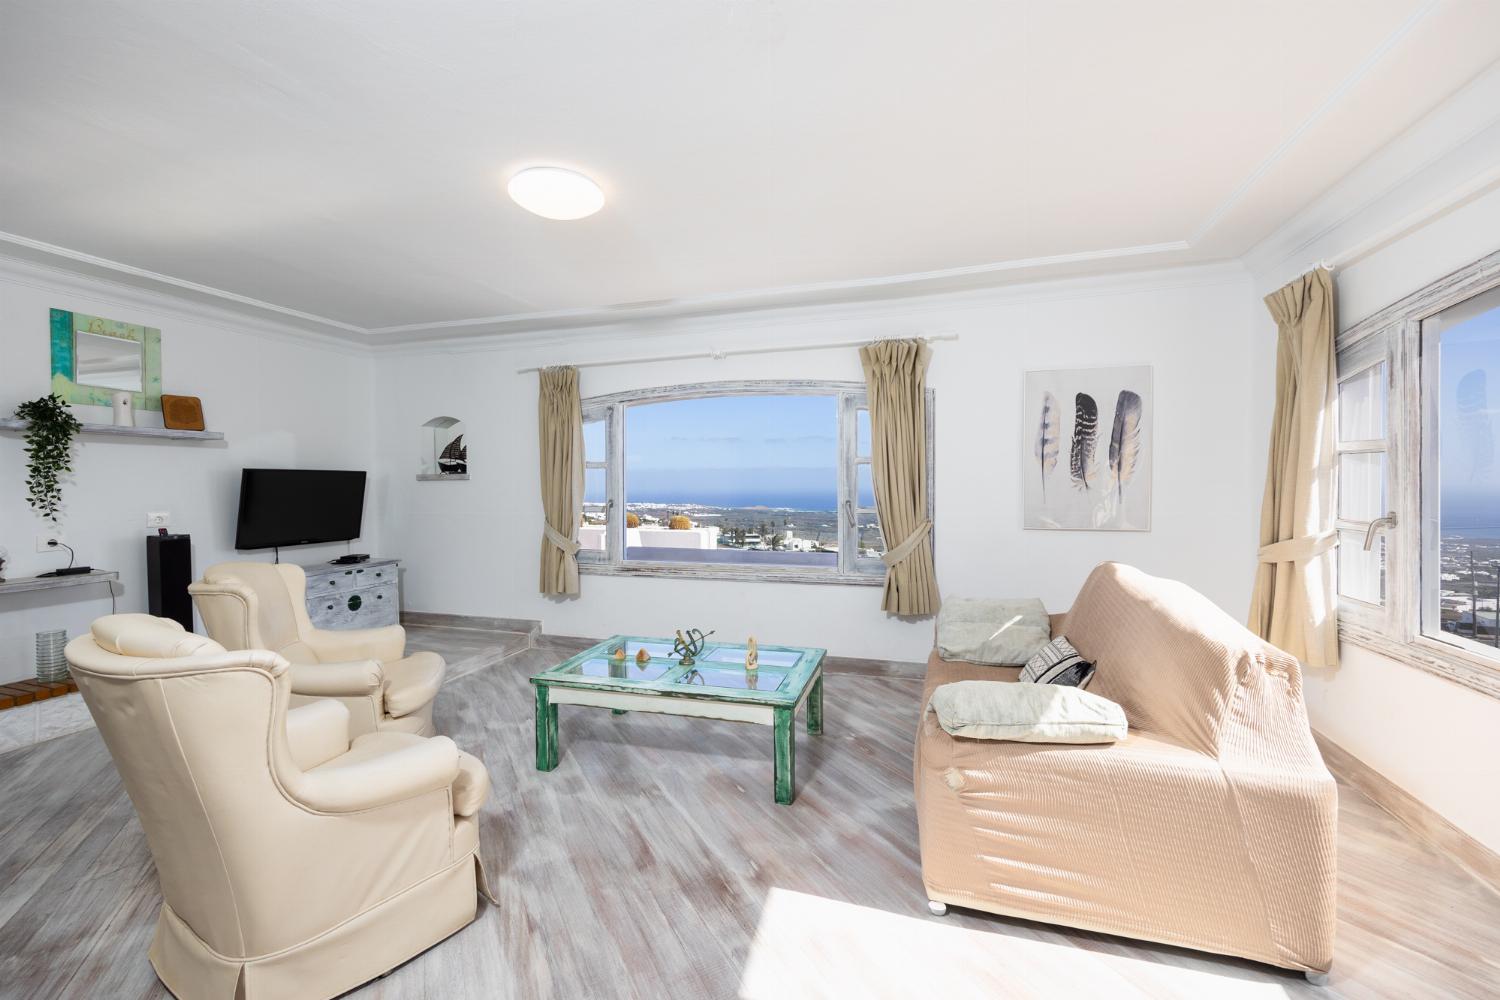 Unit 3: living room with sofa, ornamental fireplace, WiFi internet, satellite TV, and sea views